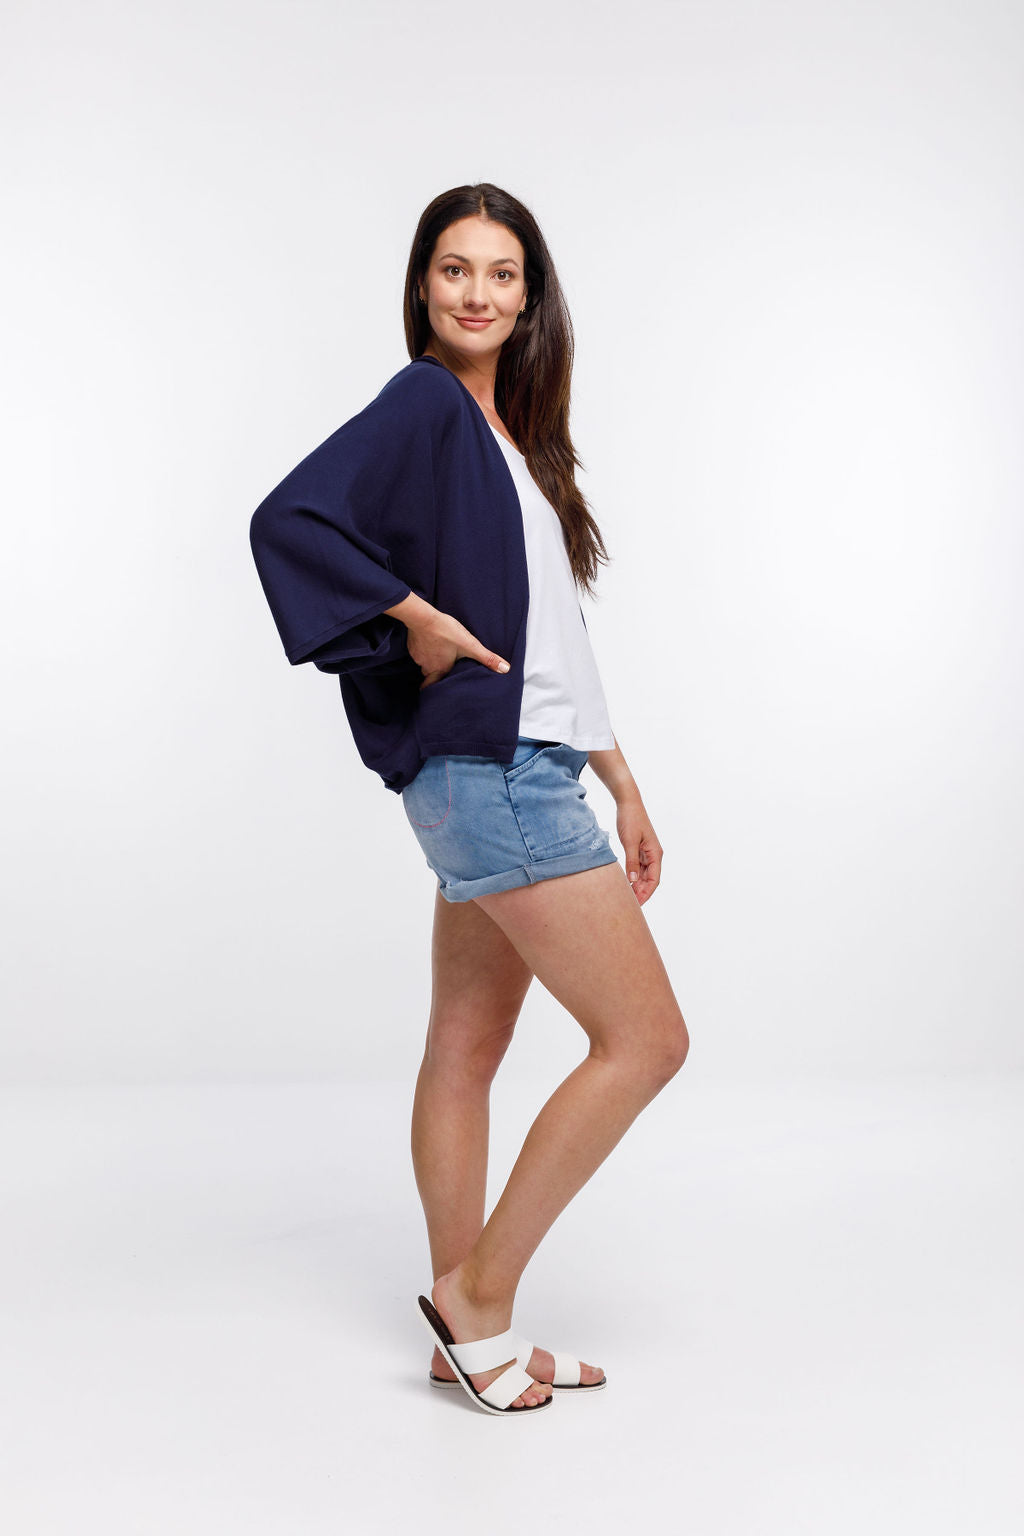 Home Lee Knit Cape - Navy